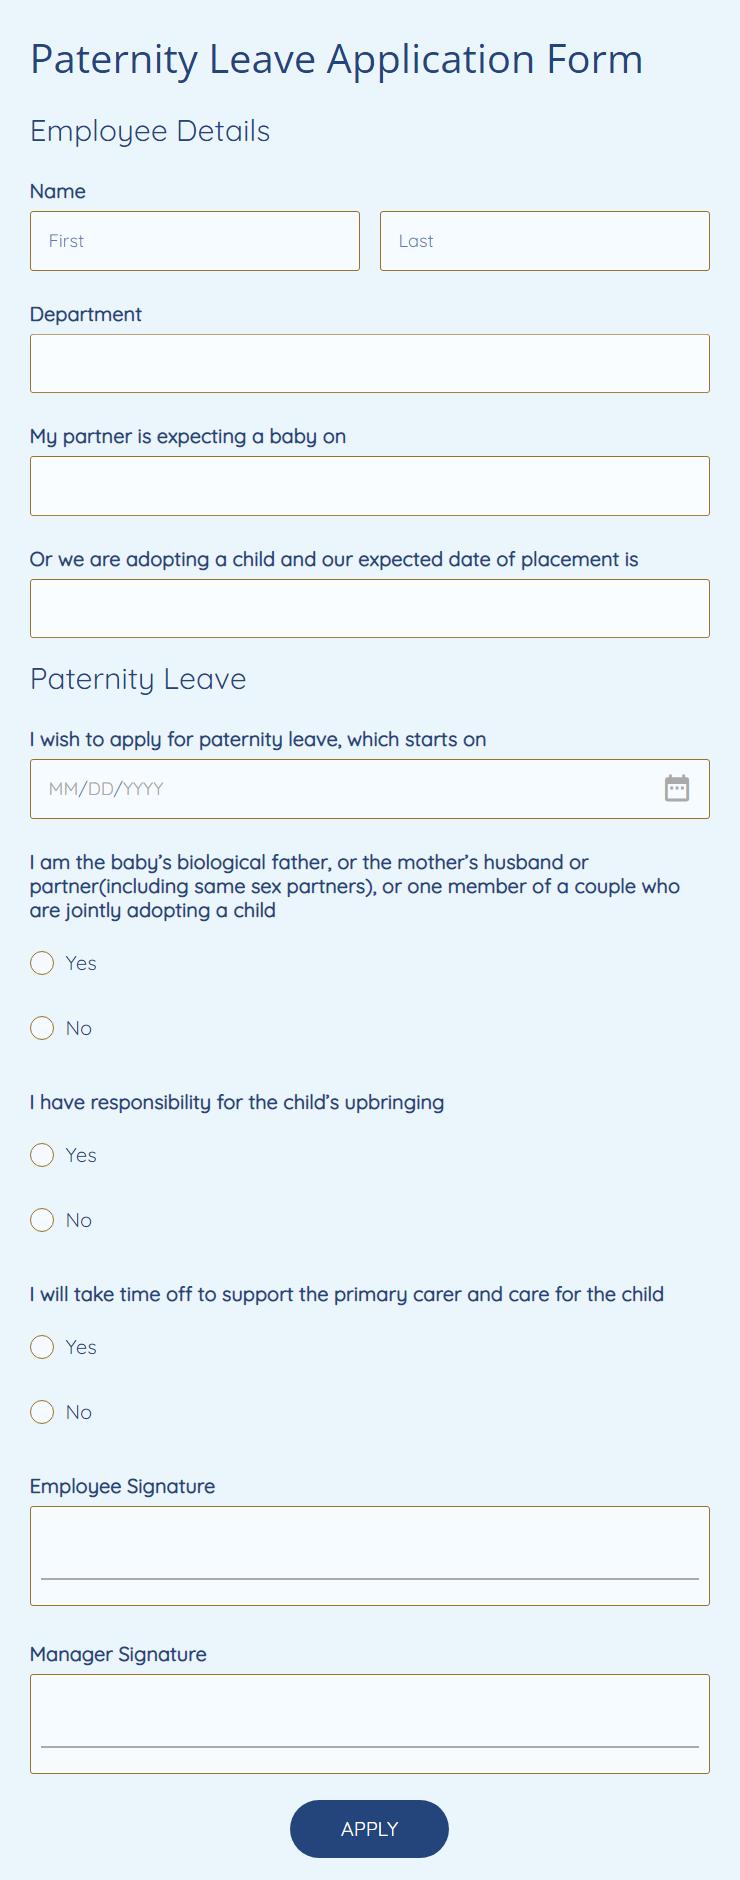 Paternity Leave Application Form Template 123 Form Builder